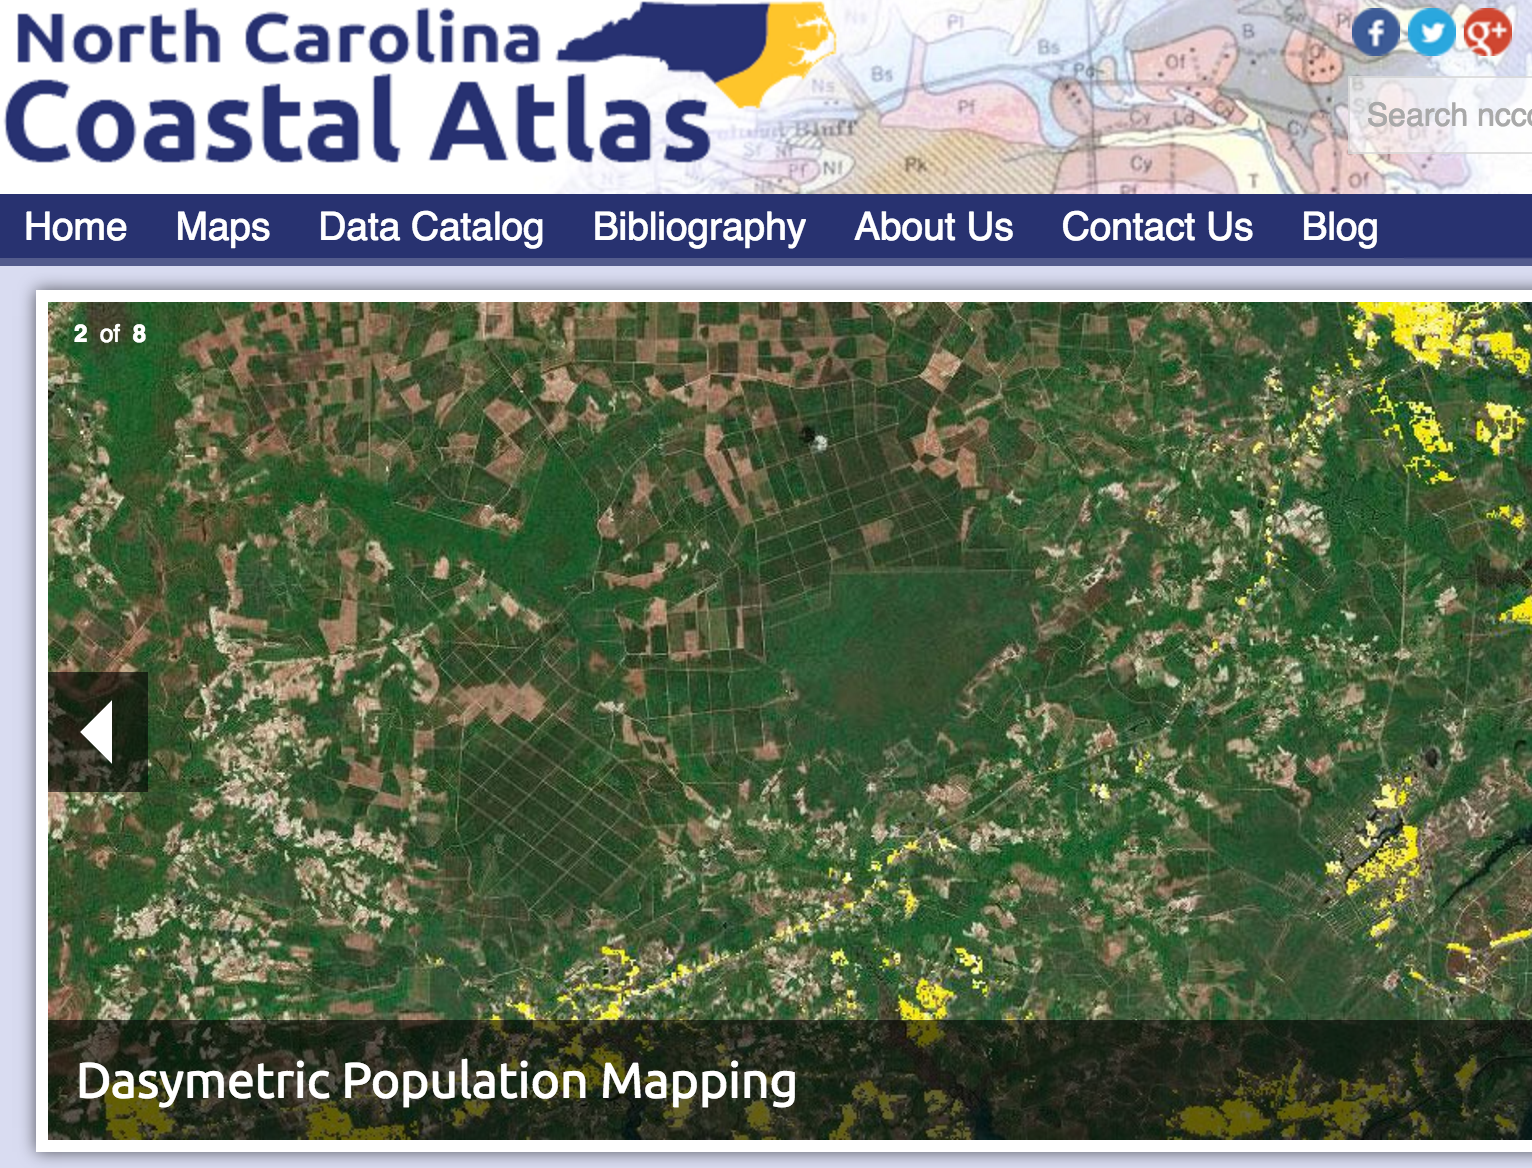 The front page of the NC Coastal Atlas, published as part of 